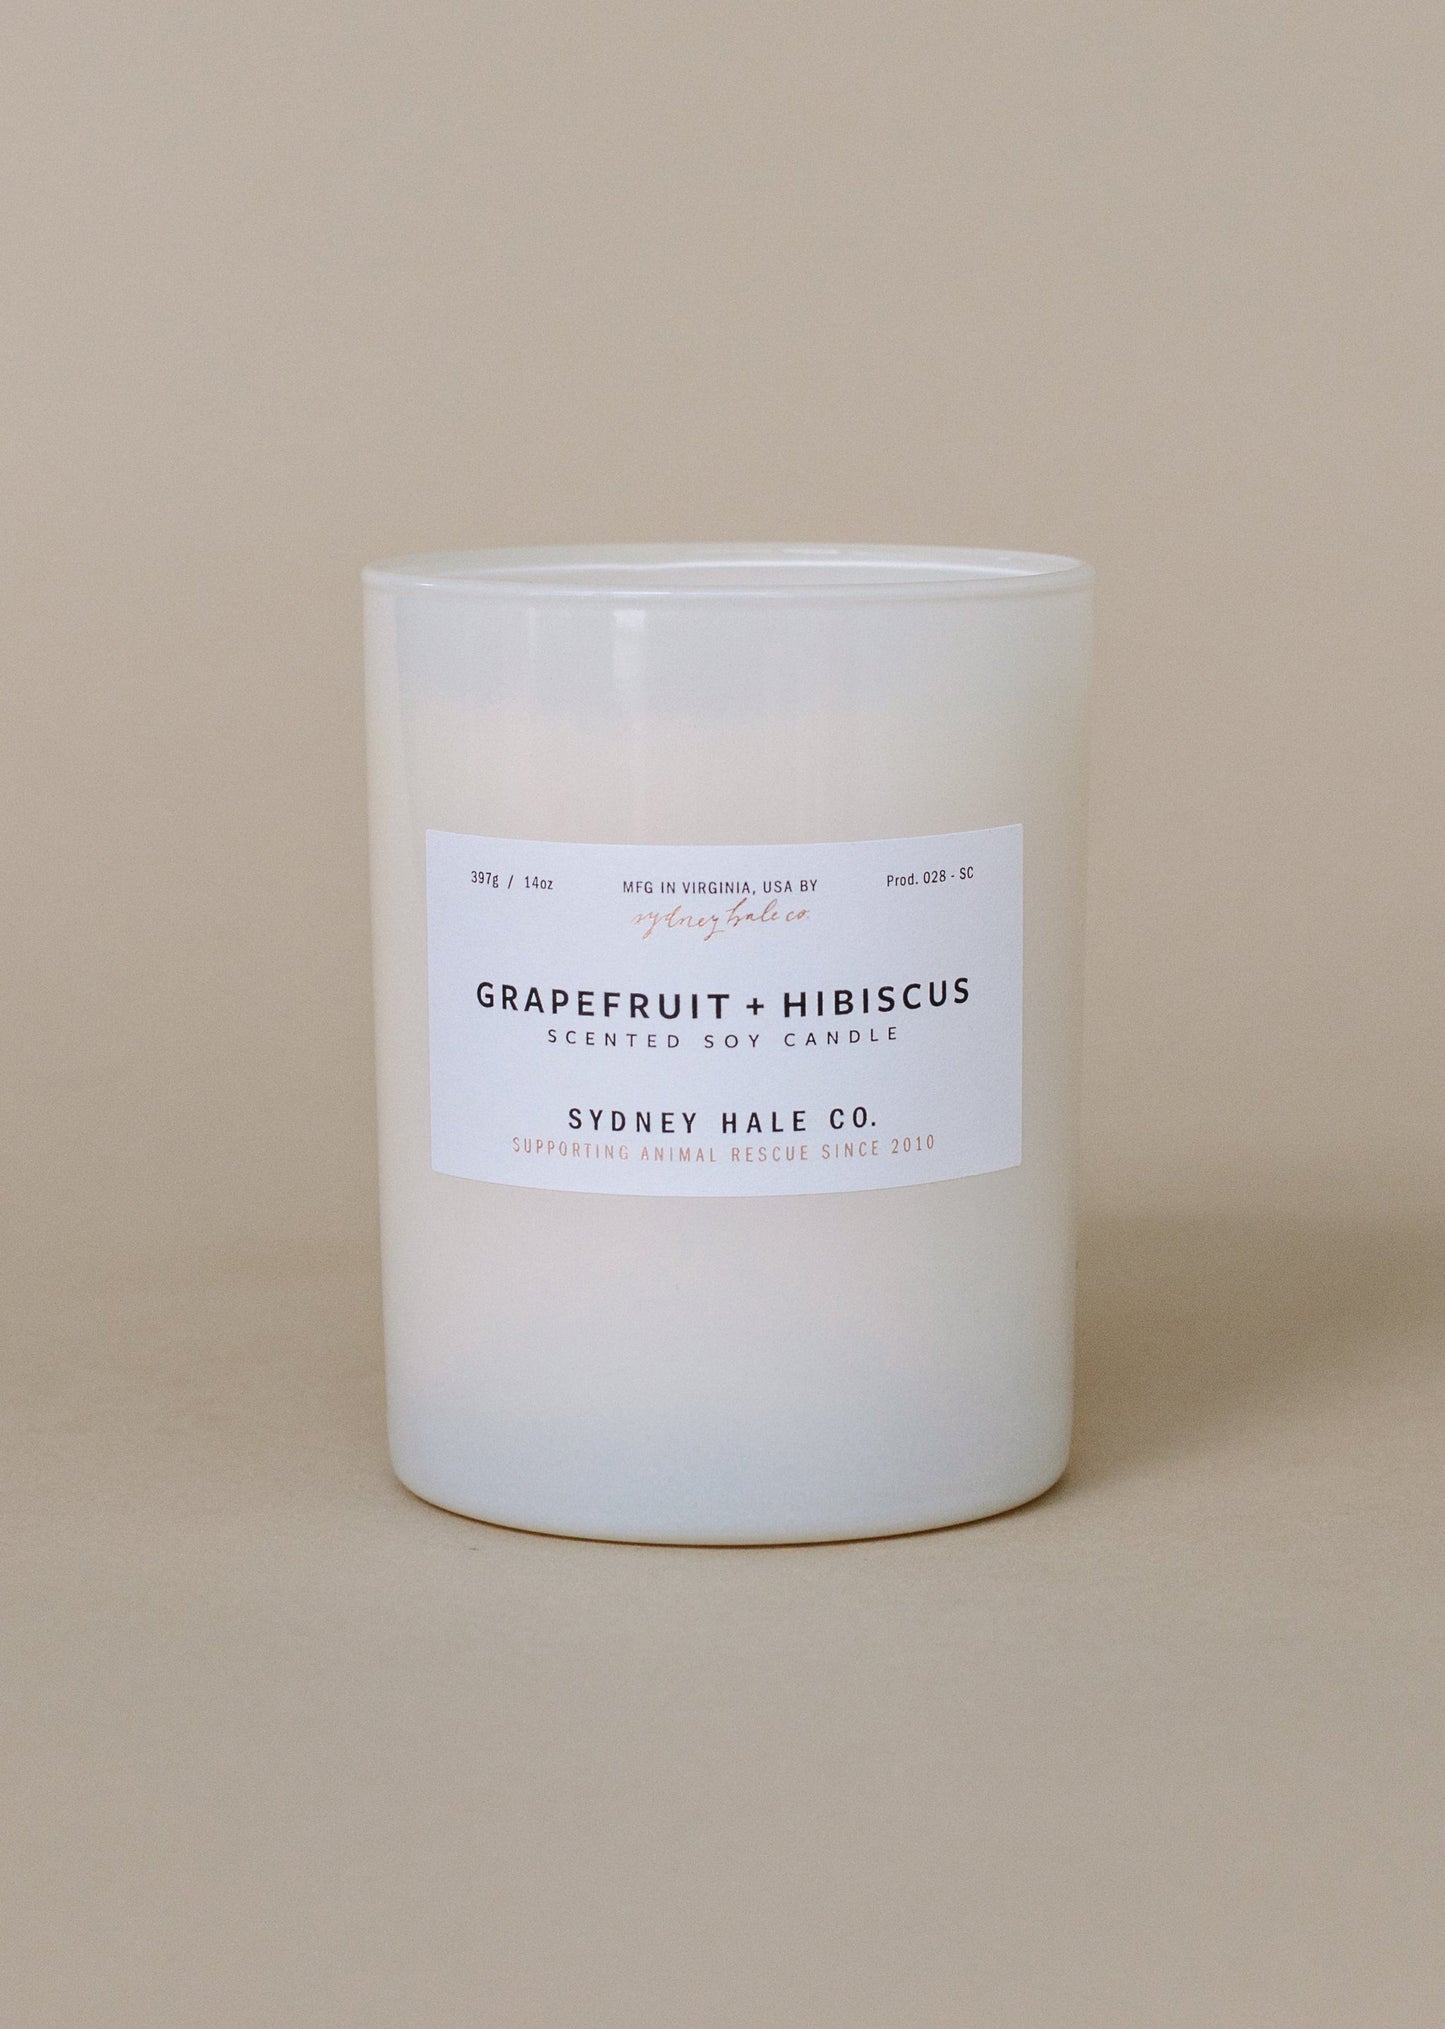 Sydney Hale Co. Grapefruit and Hibiscus Candle